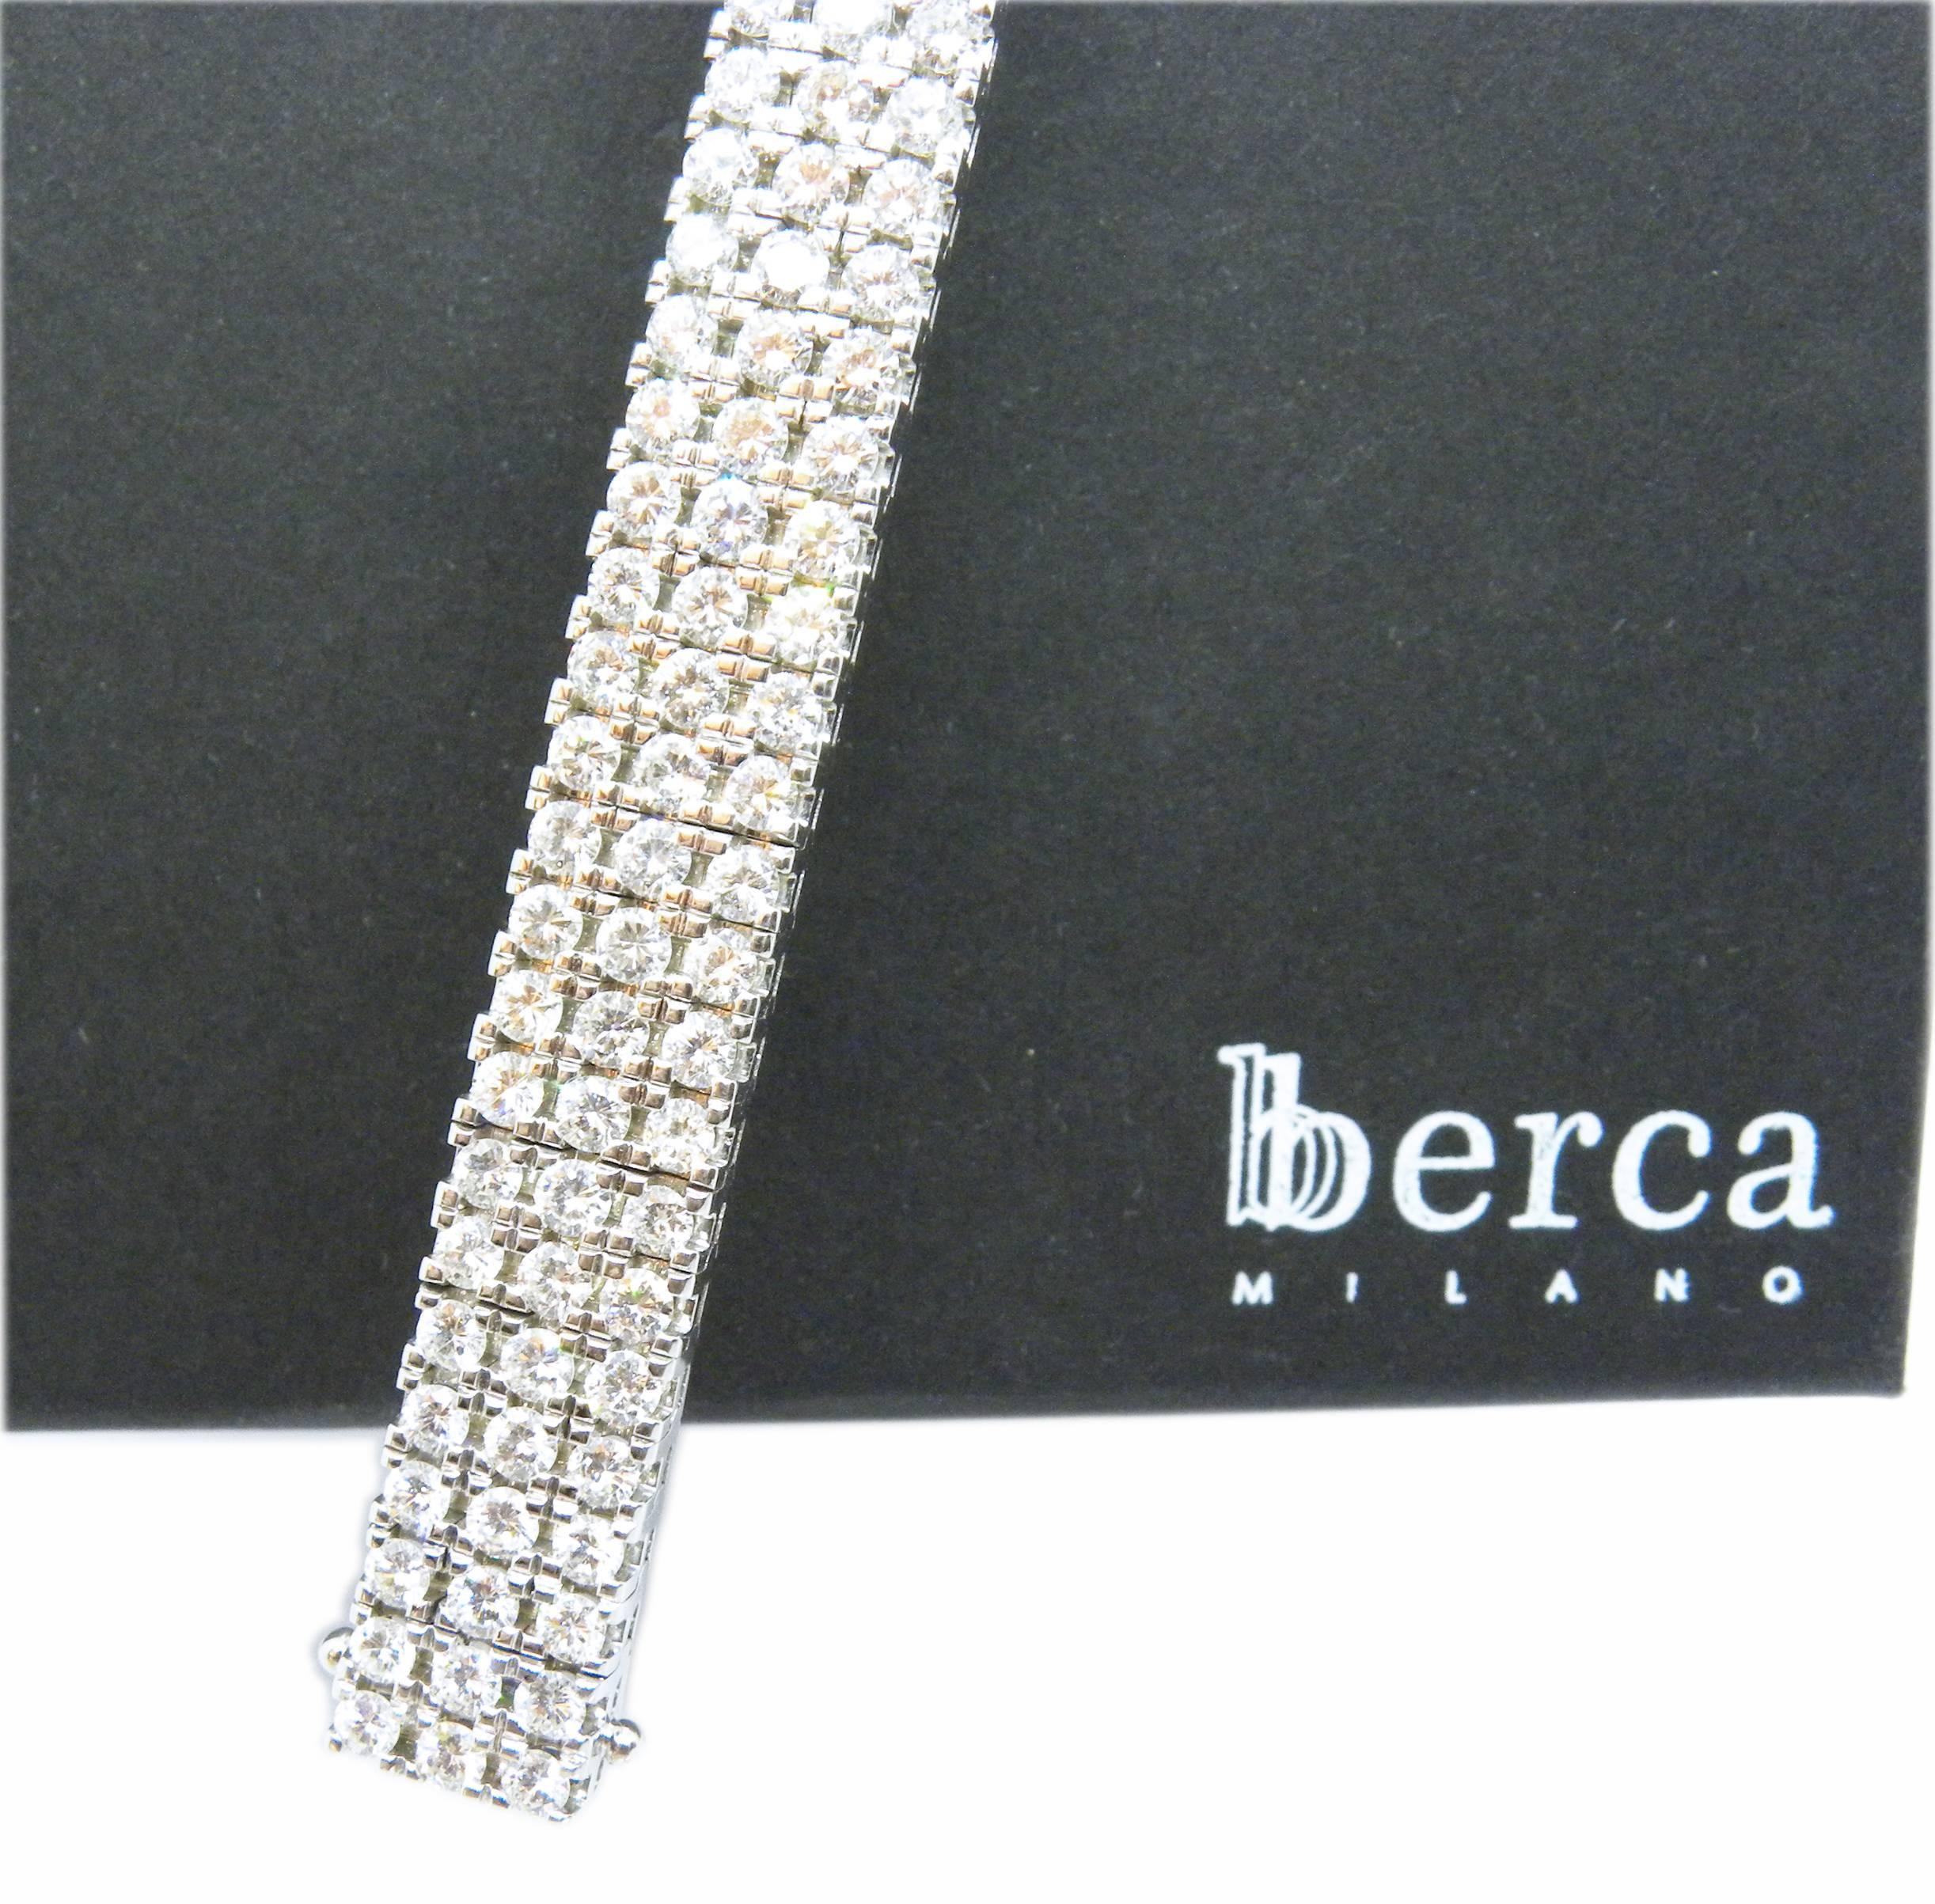 Berca 12.60Kt 174 White Diamond White Gold Setting Three Lines Tennis Bracelet In New Condition For Sale In Valenza, IT